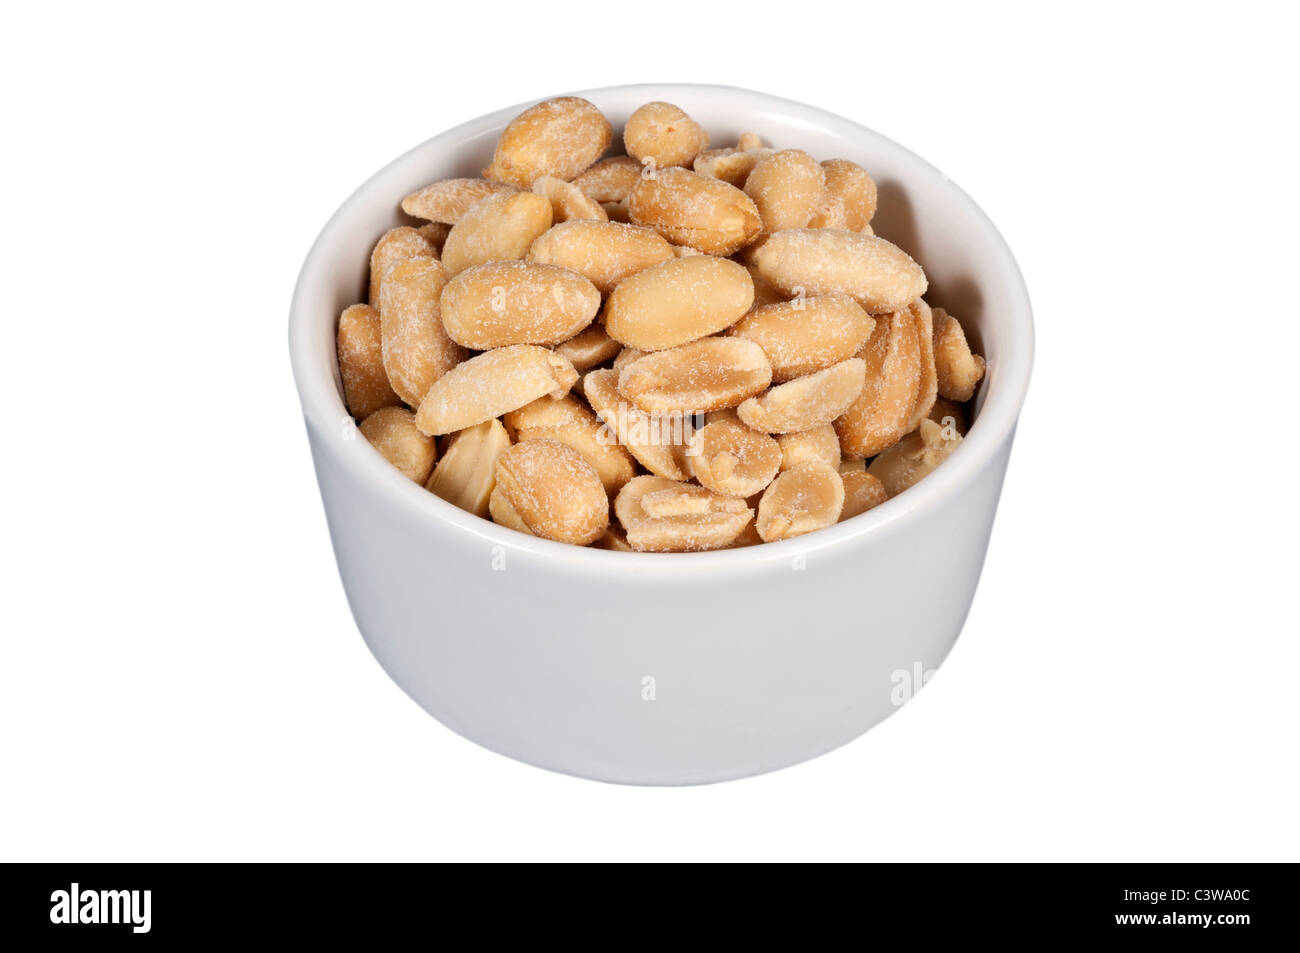 Bowl of Peanuts on a White Background Stock Photo